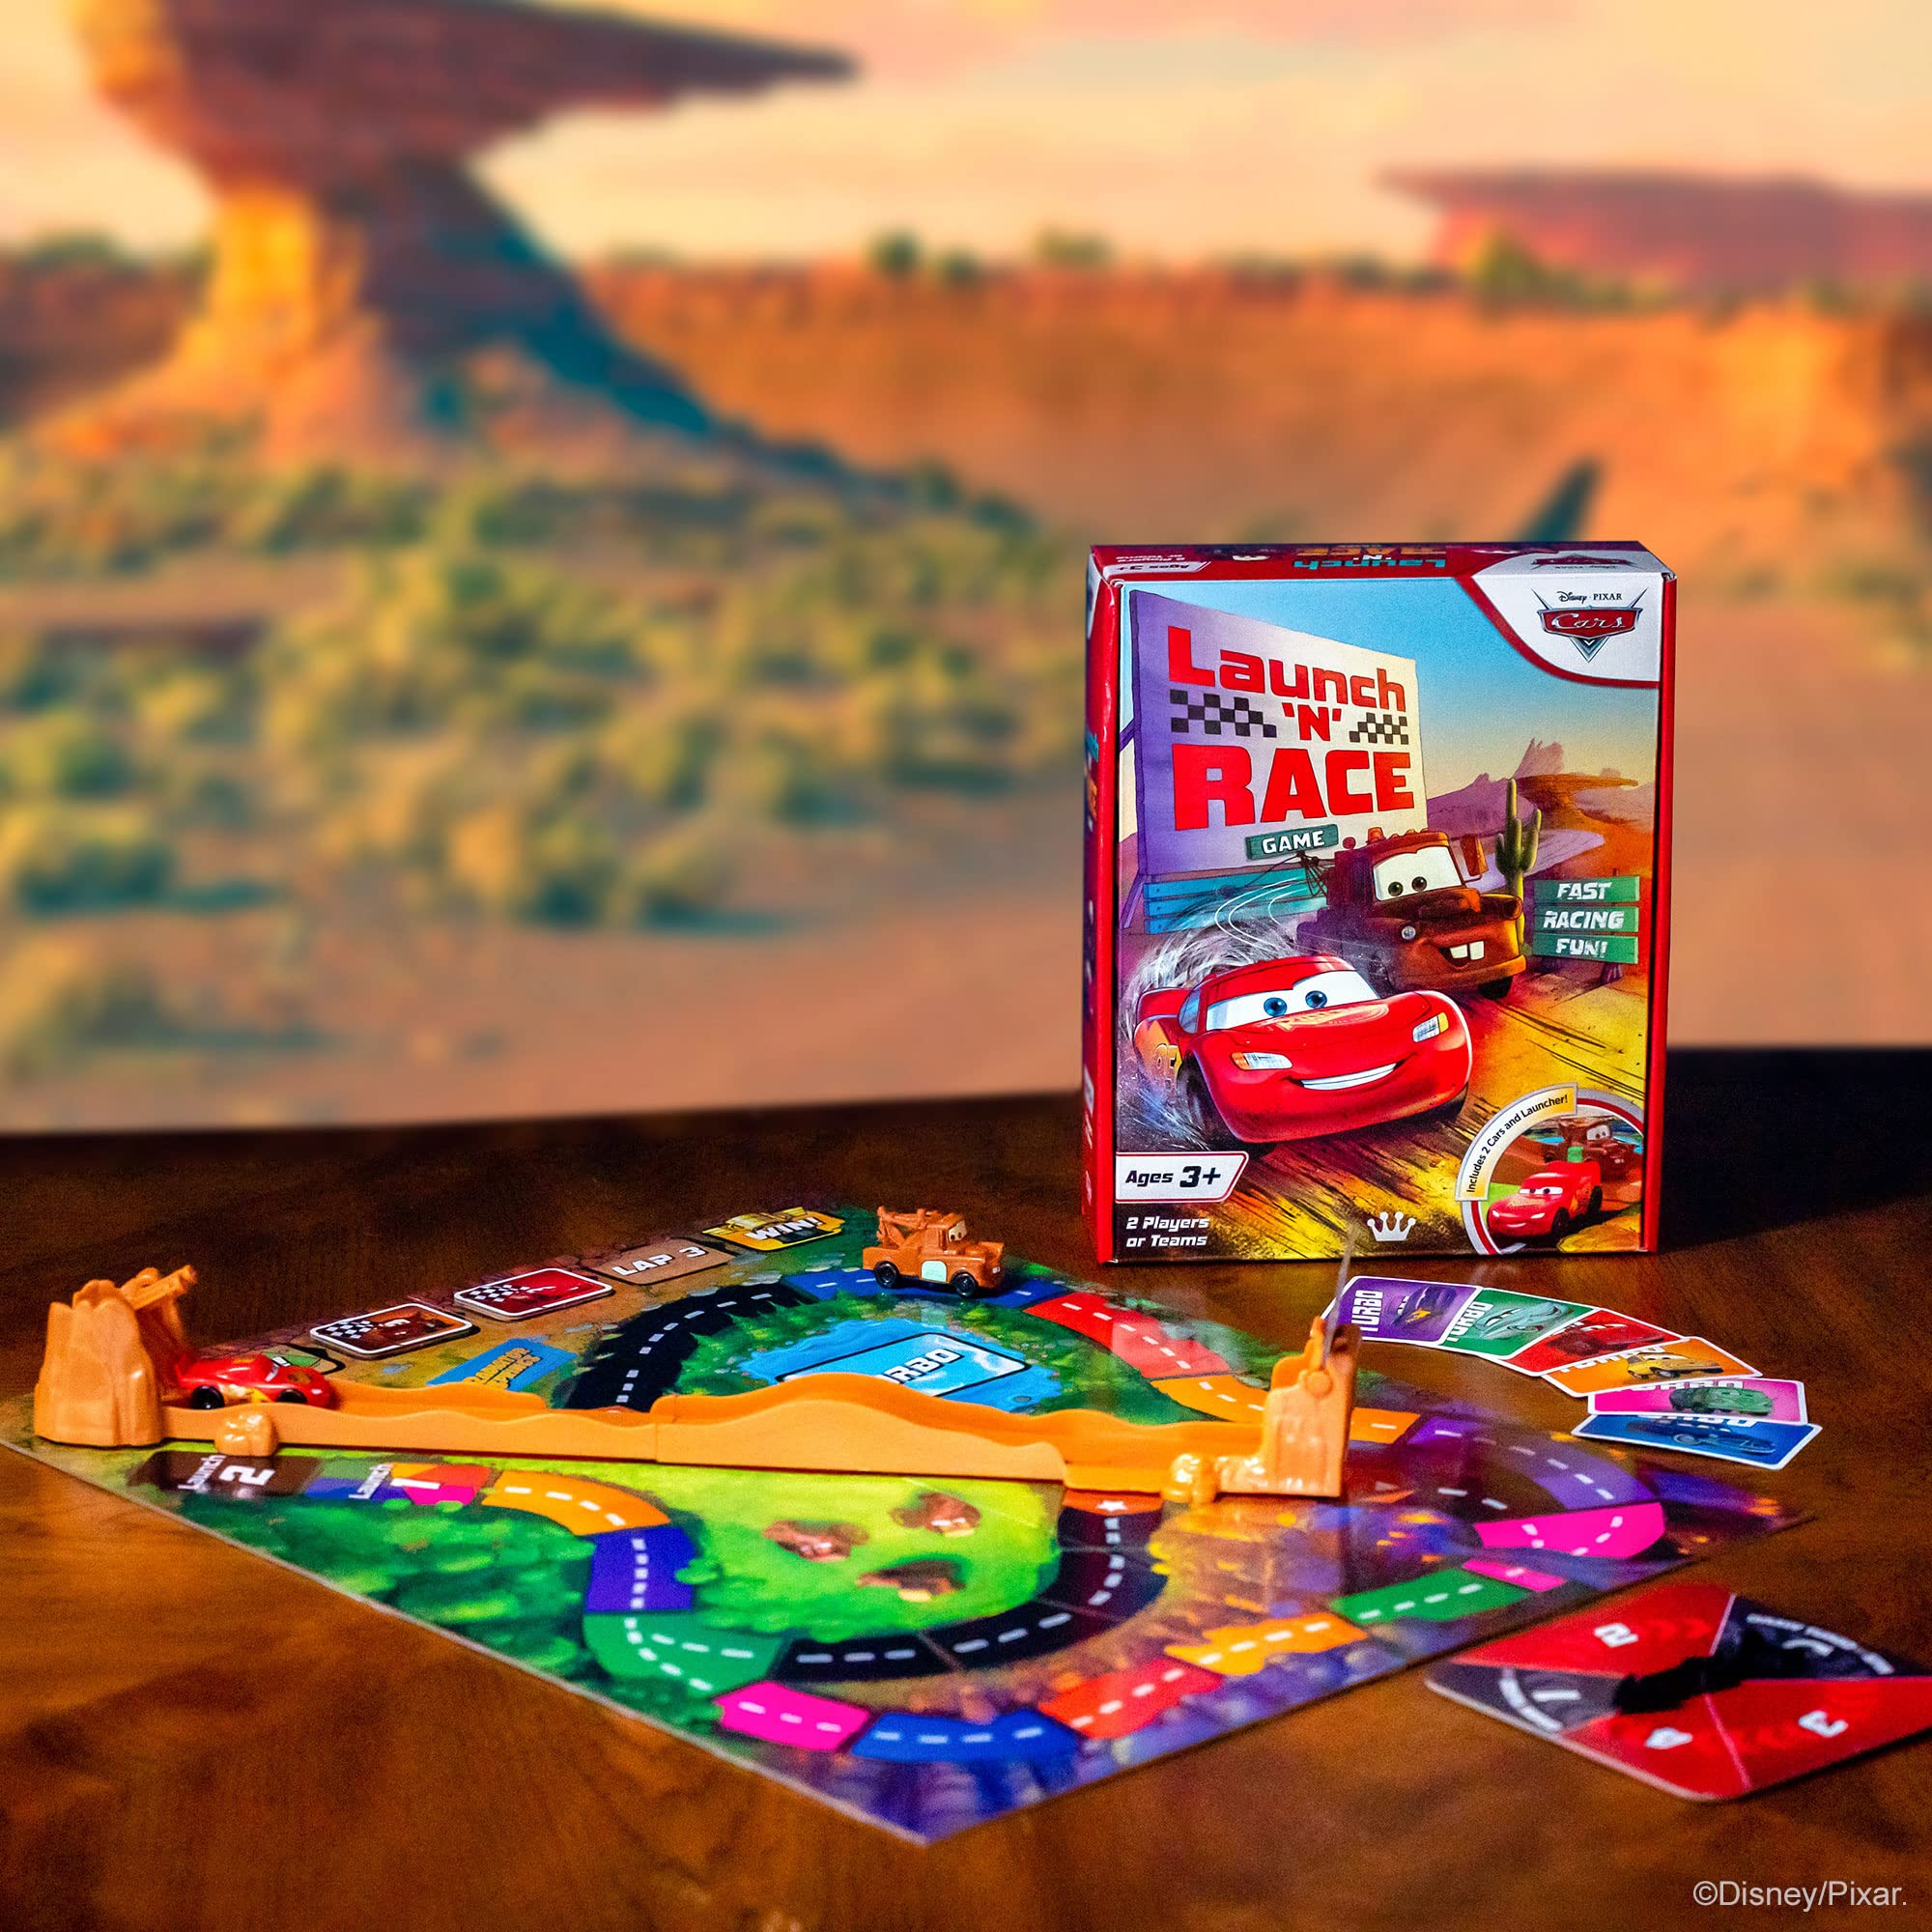 Funko Disney/Pixar Cars Launch ‘N’ Race Game for 2 or More Players Ages 3 and Up